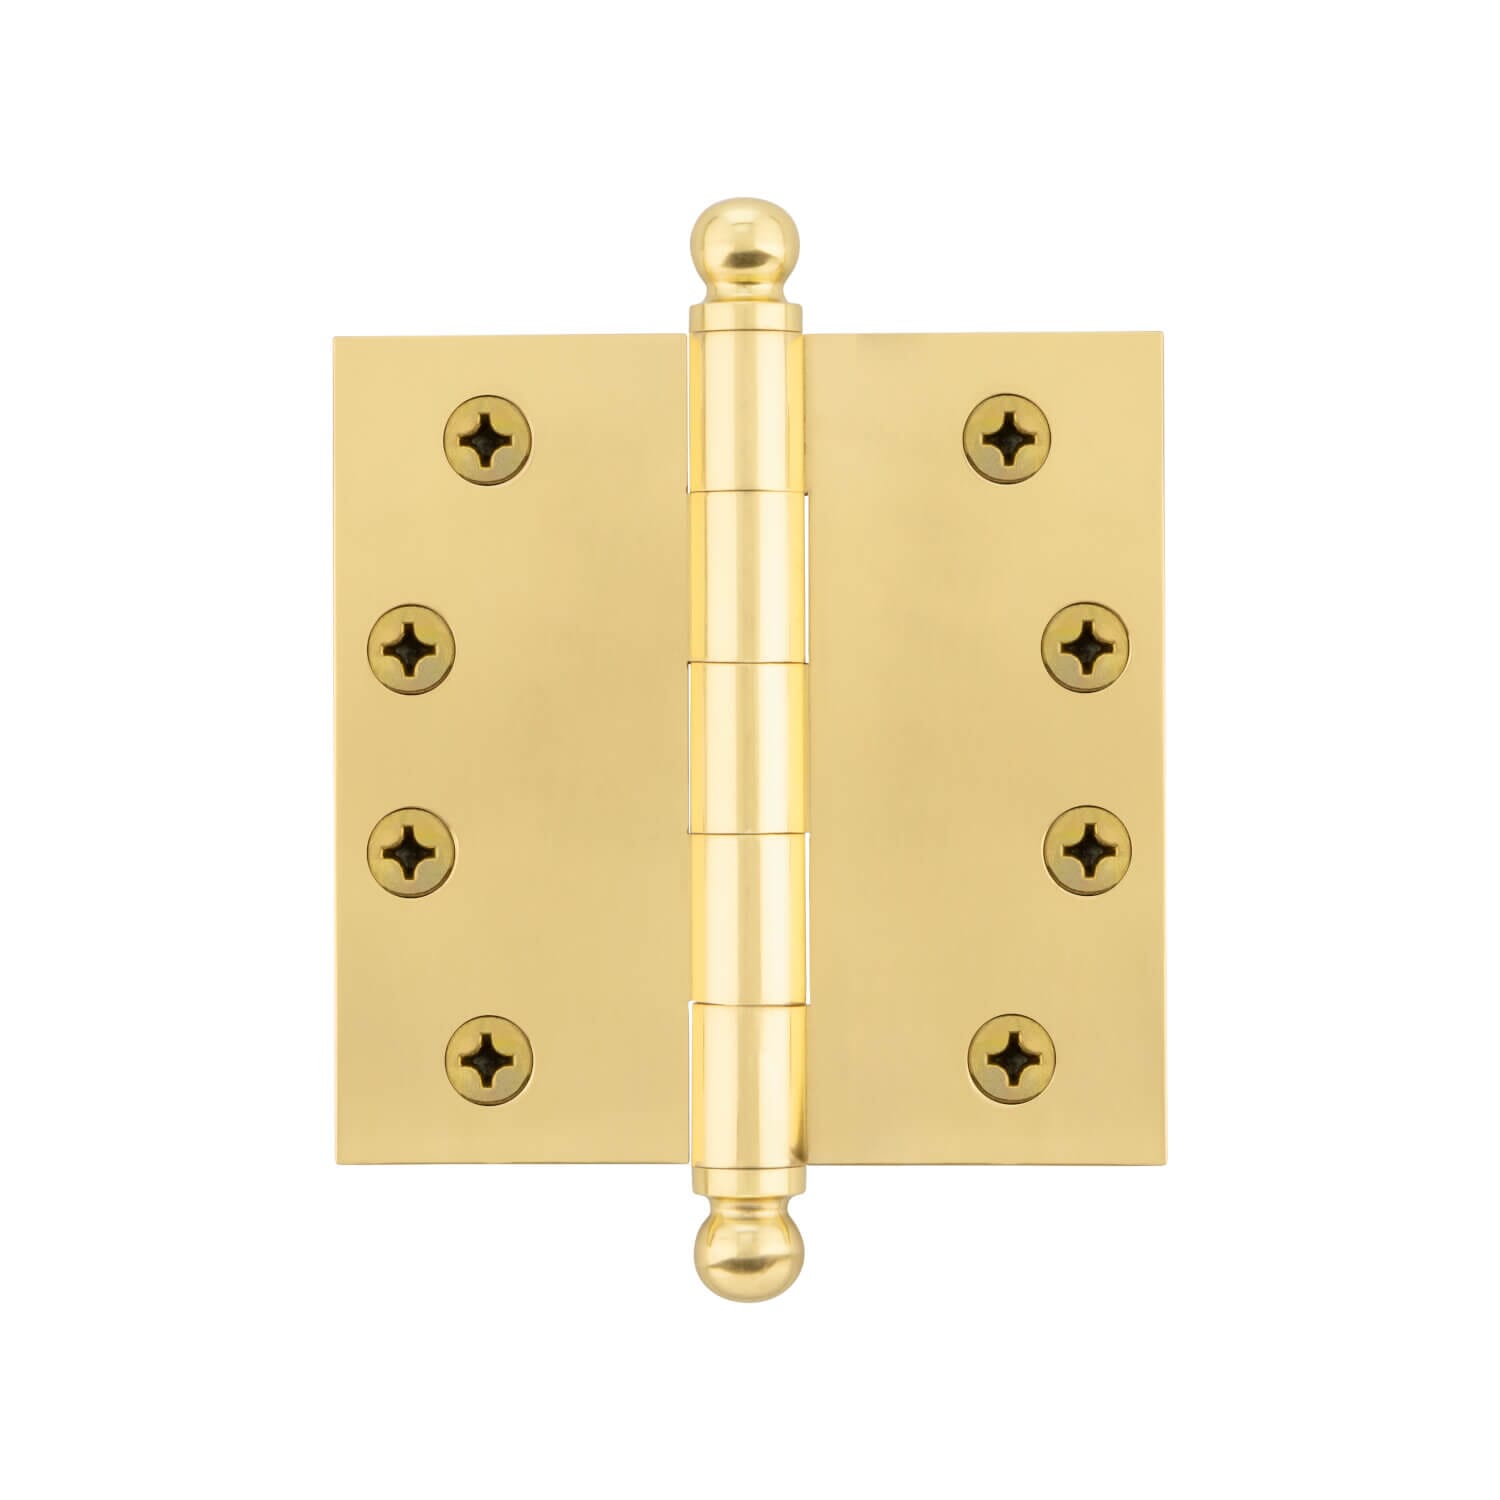 4 Ball Tip Heavy Duty Hinge with Square Corners in Unlacquered Brass